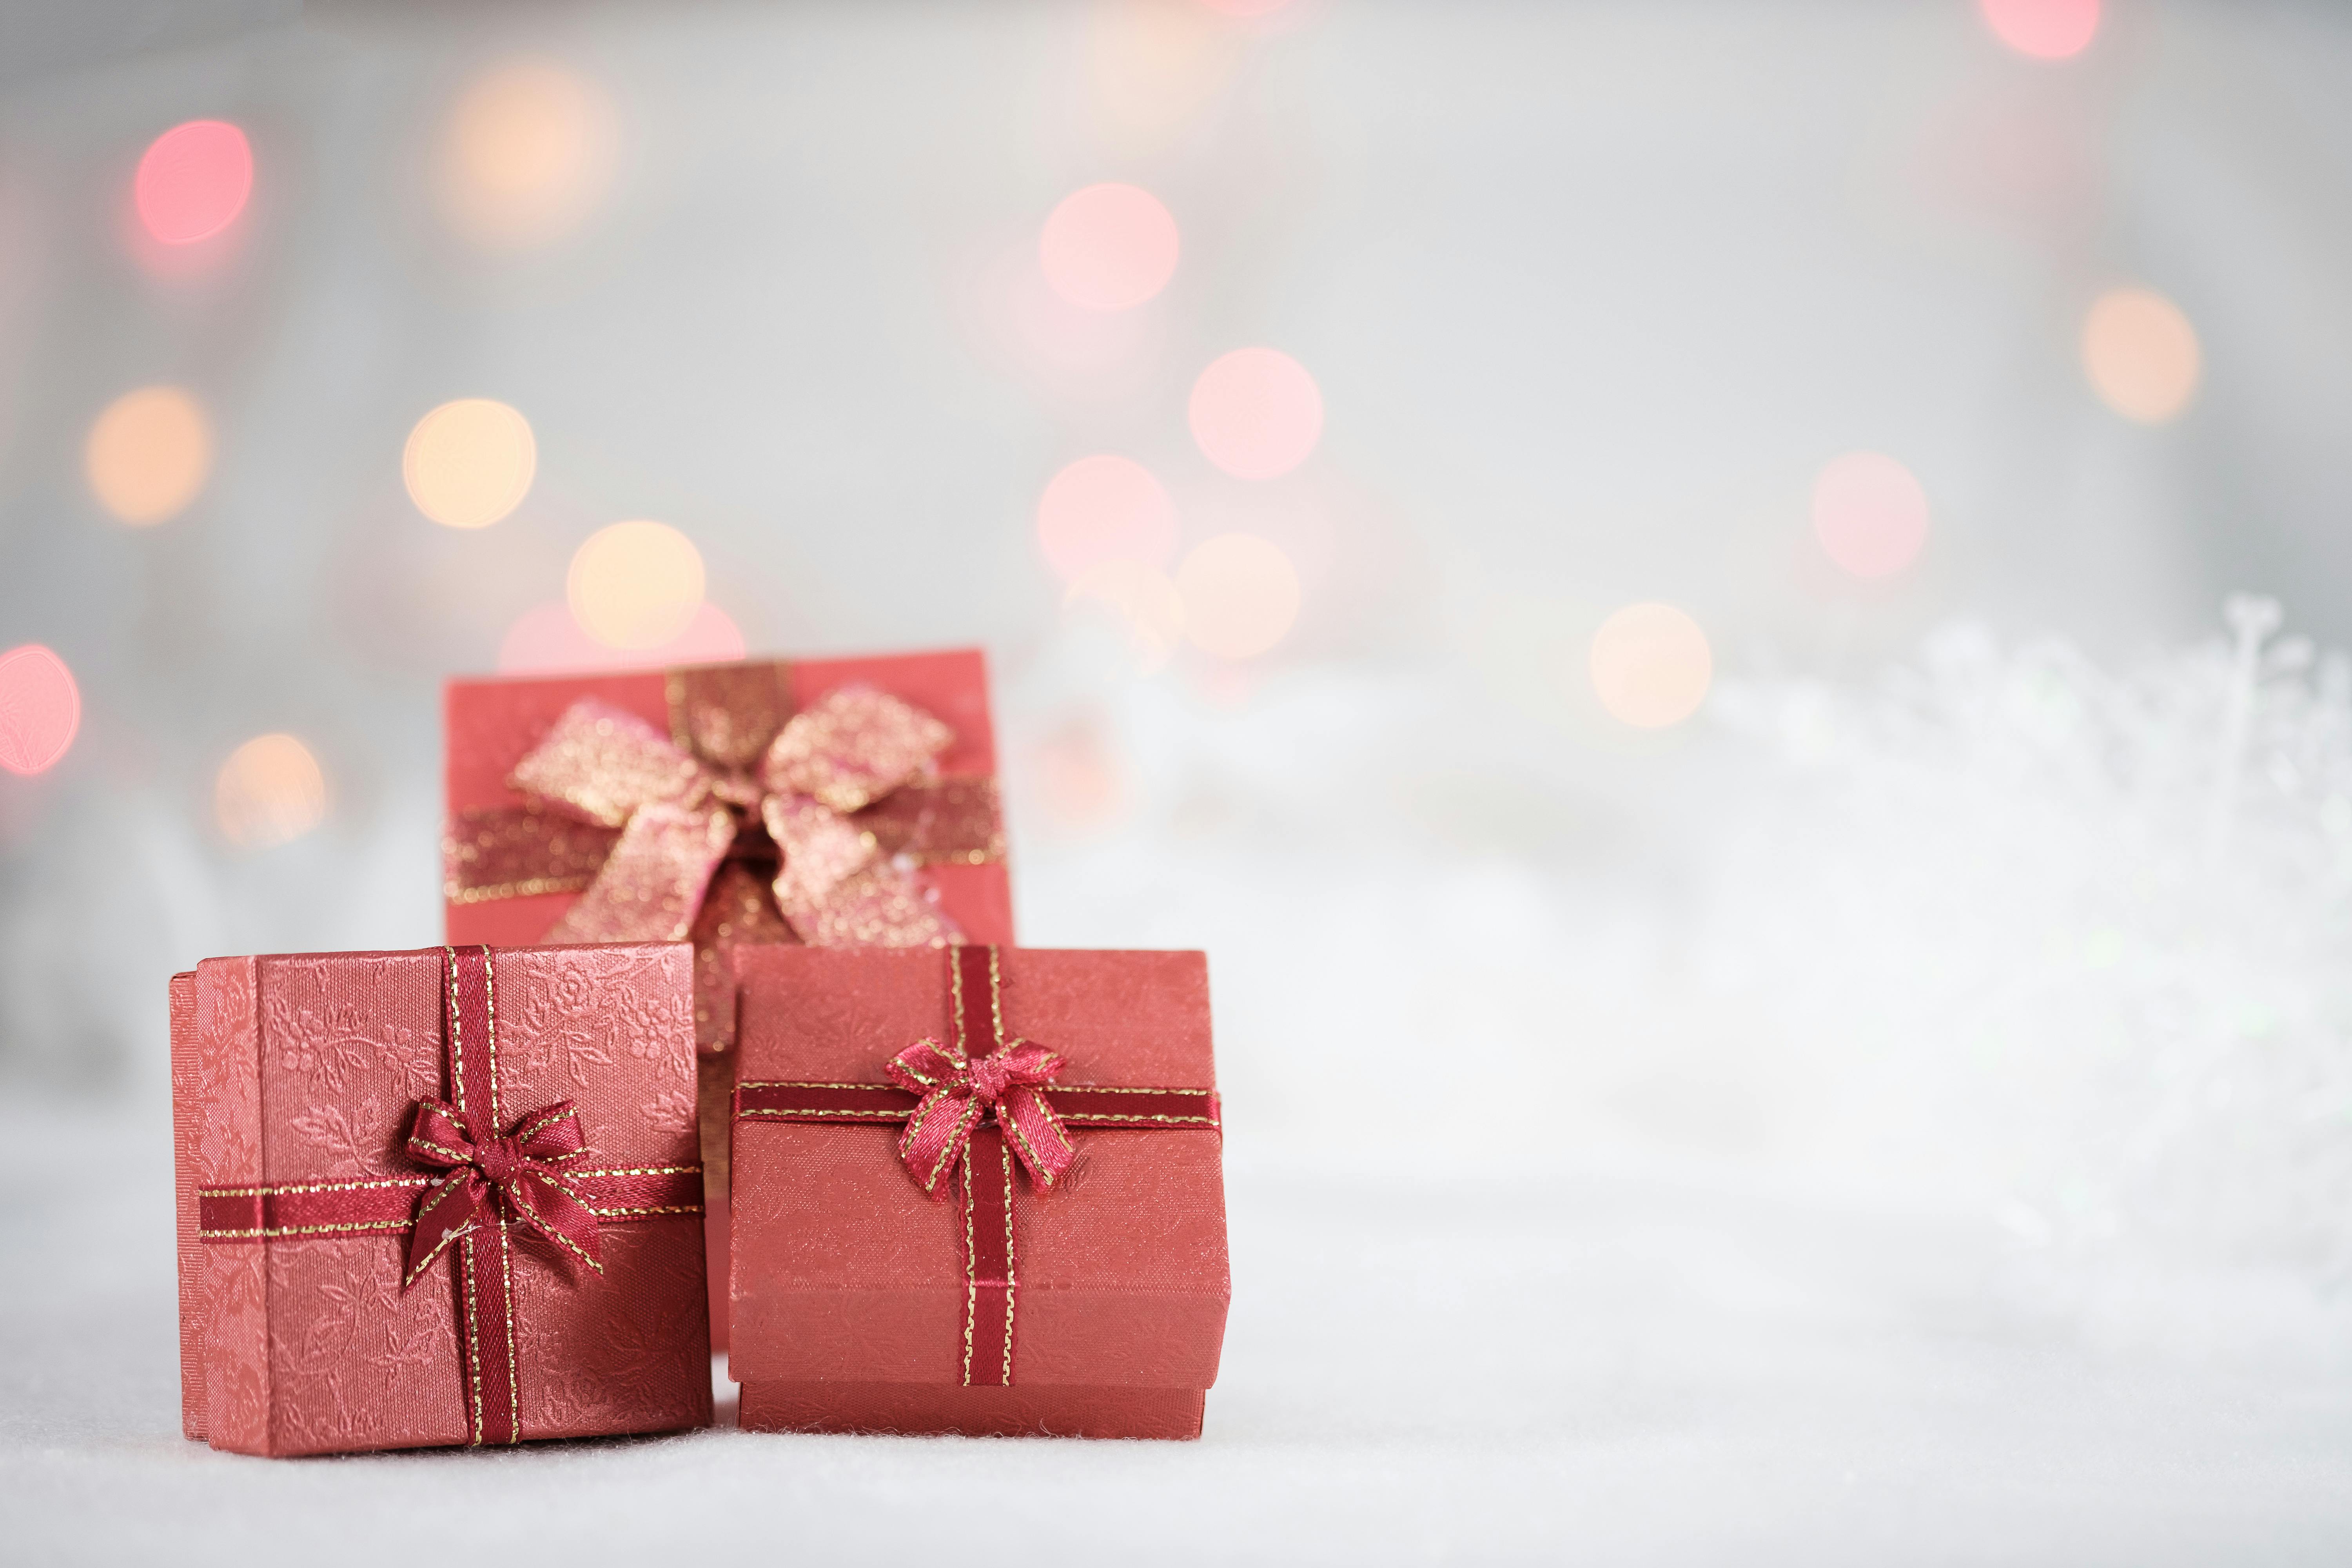 Christmas Gift Photos, Download The BEST Free Christmas Gift Stock